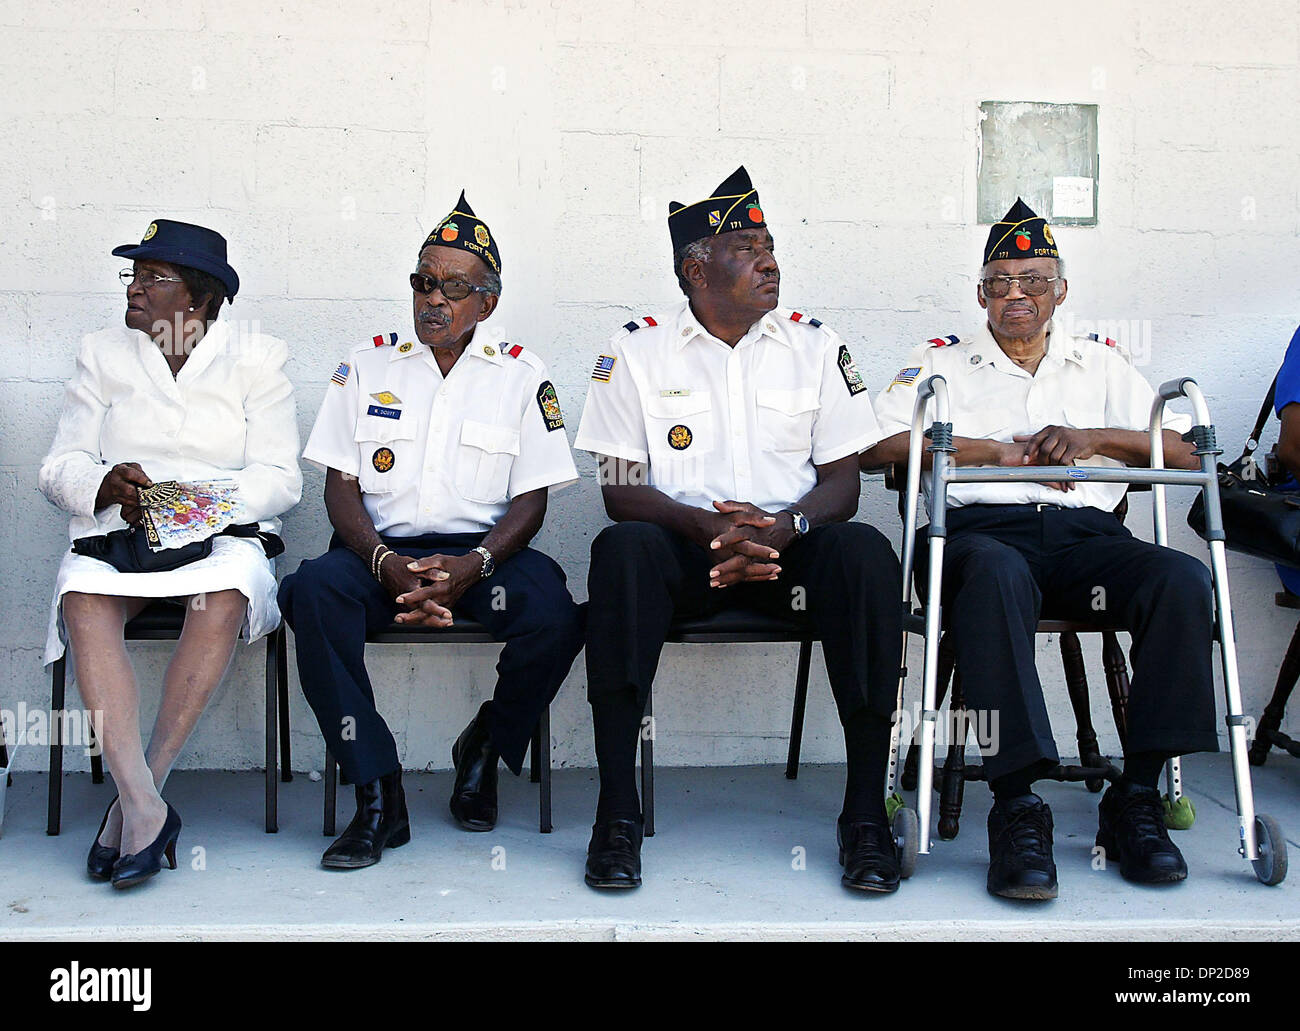 May 28, 2006; Fort Pierce, FL, USA; Mary Platt, from left, William B. Scott, Arstell(cq) Mims and William Rolle(cq) enjoy shade before the Memorial Day Service honoring soldiers from St. Lucie County at the Charles O. Hines American Legion Post 171 Sunday.  Mandatory Credit: Photo by Meghan McCarthy/Palm Beach Post/ZUMA Press. (©) Copyright 2006 by Palm Beach Post Stock Photo